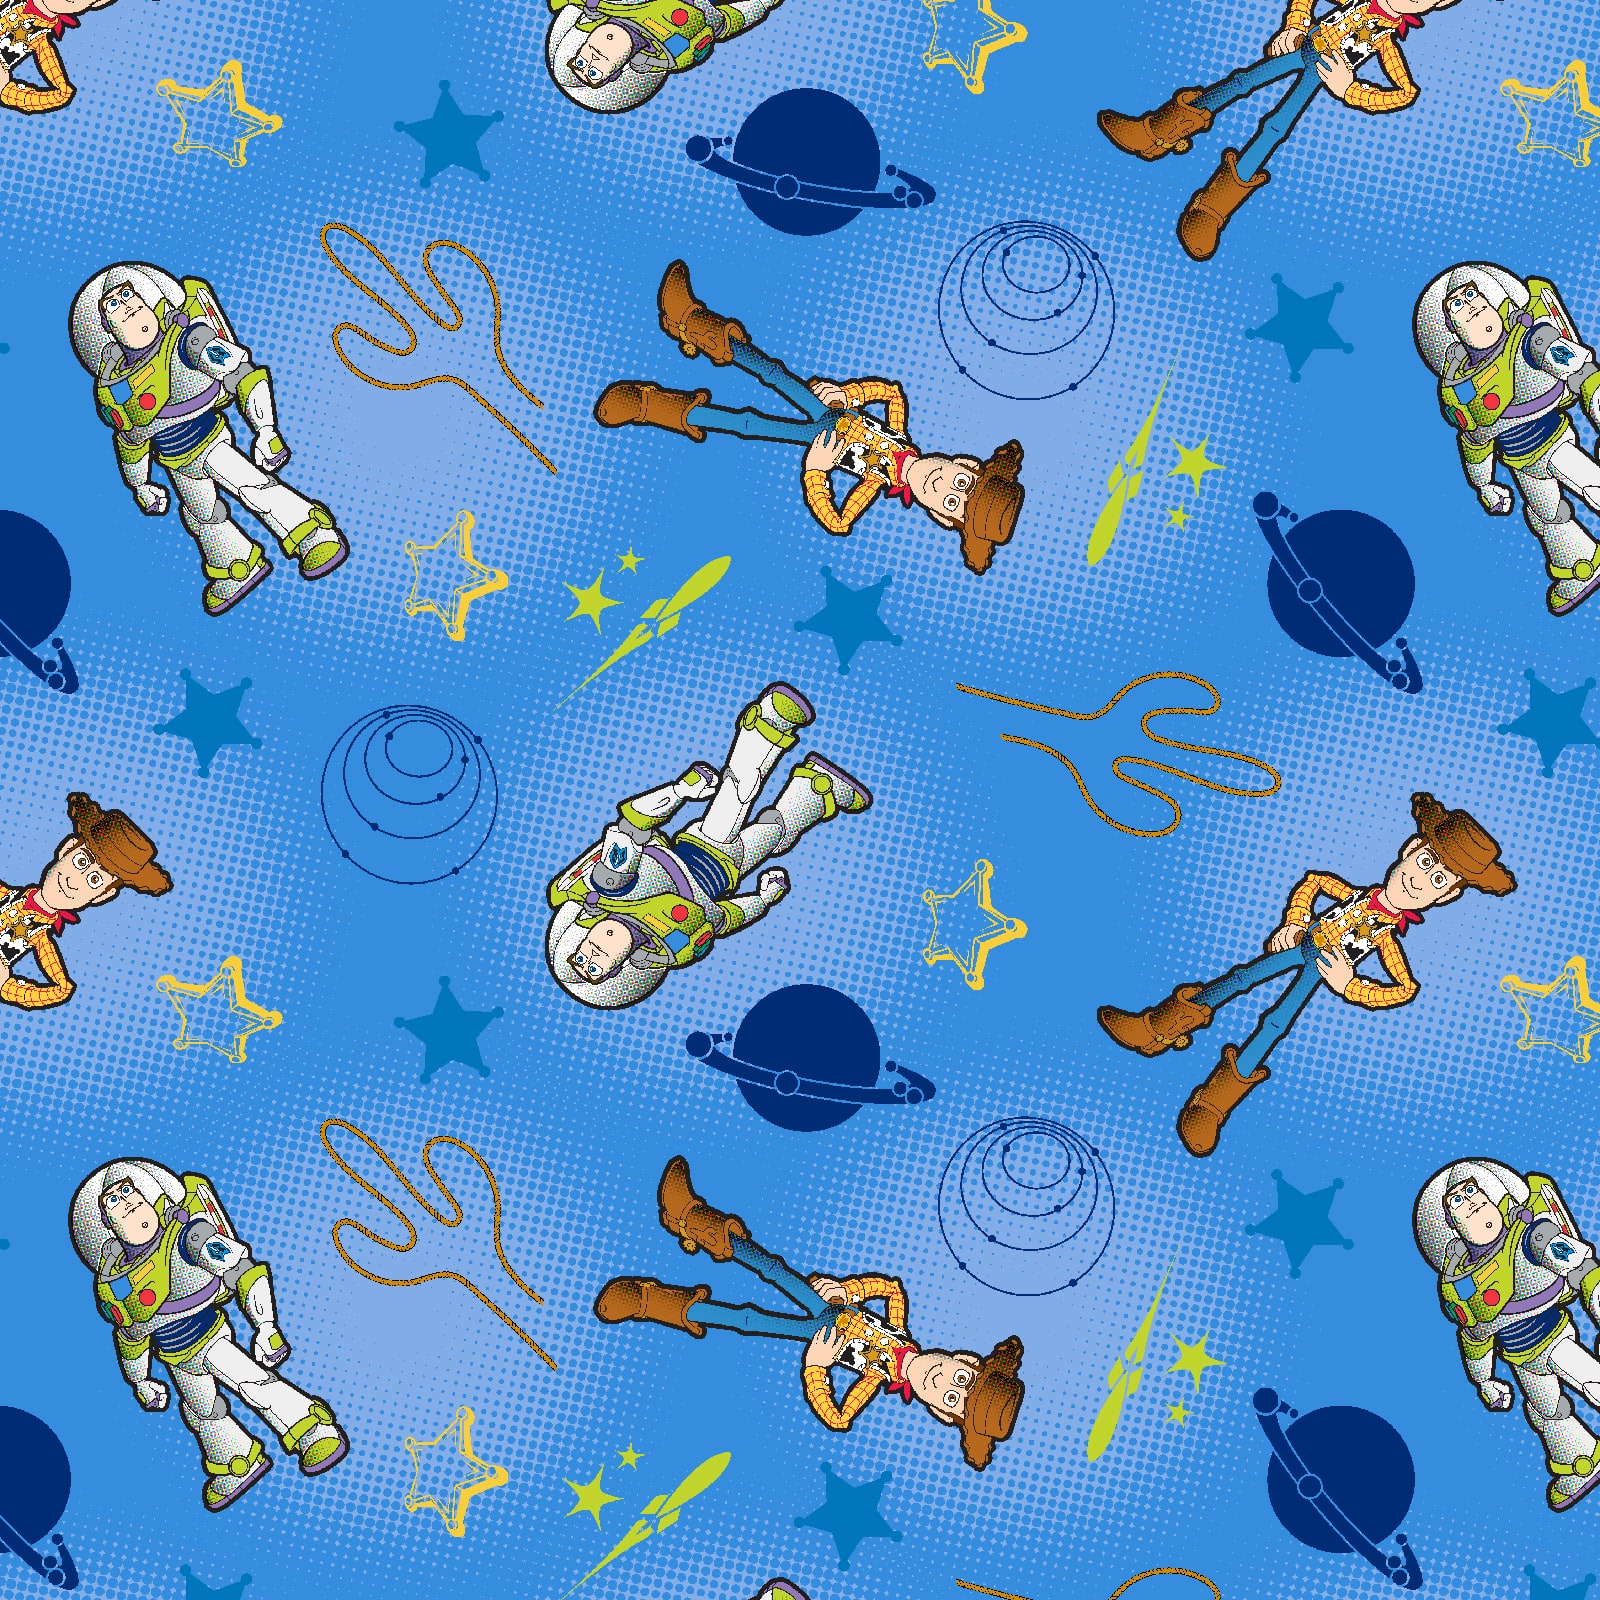 Purchase the Disney Pixar Toy Story Buzz & Woody Blue Cotton Fabric at